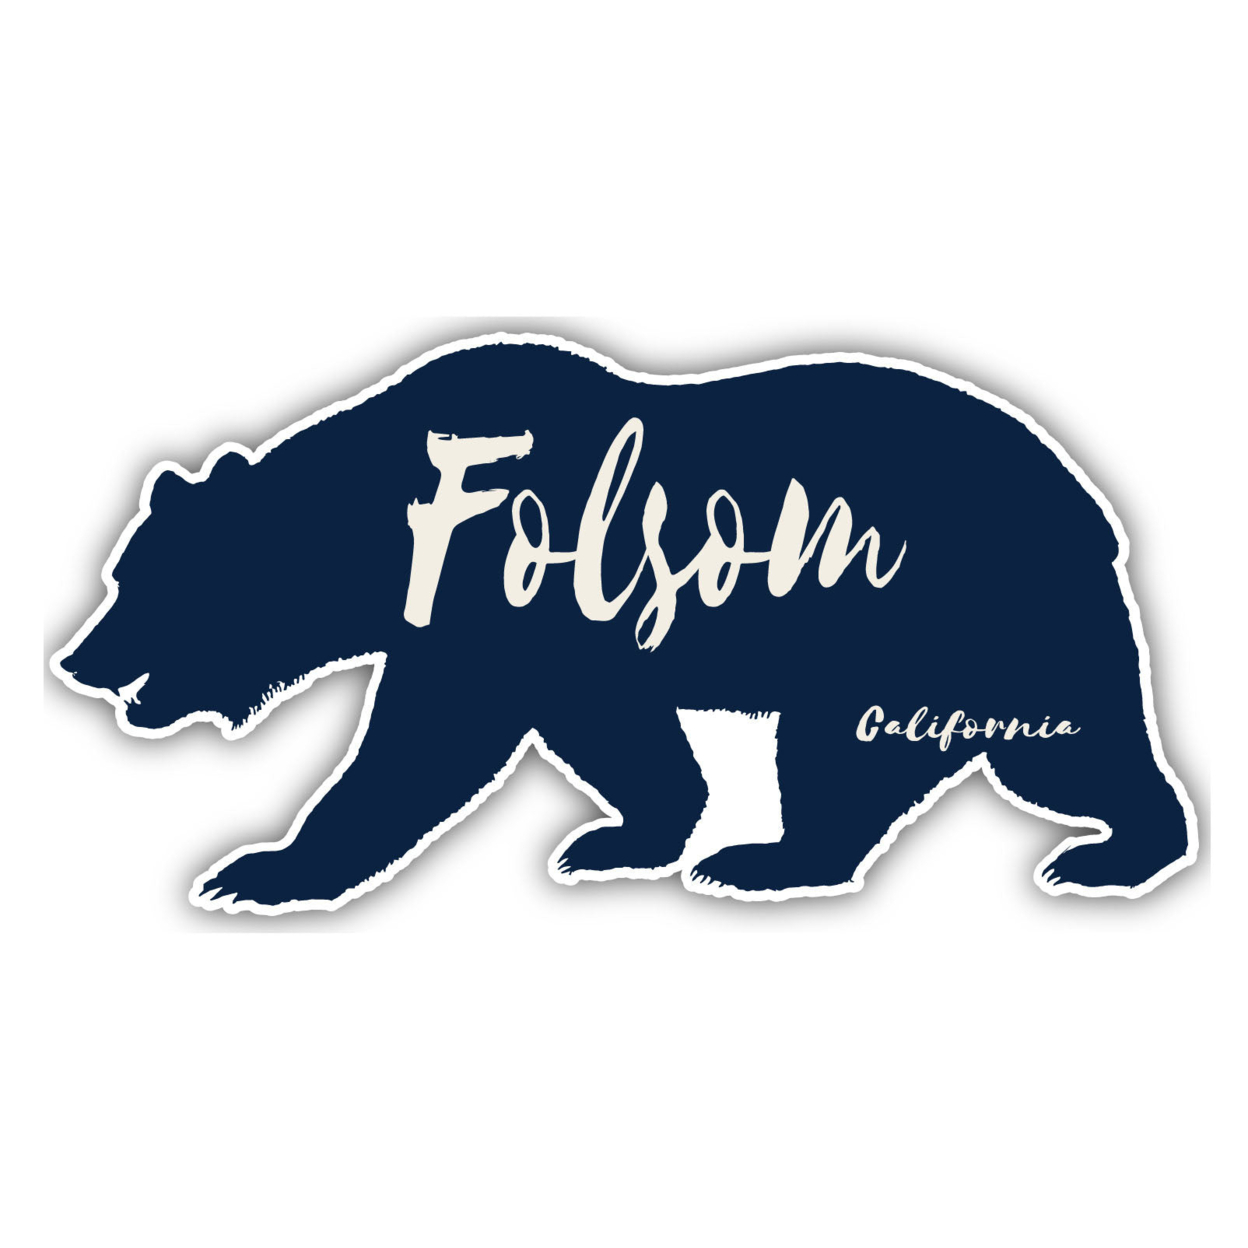 Folsom California Souvenir Decorative Stickers (Choose Theme And Size) - 4-Pack, 4-Inch, Tent